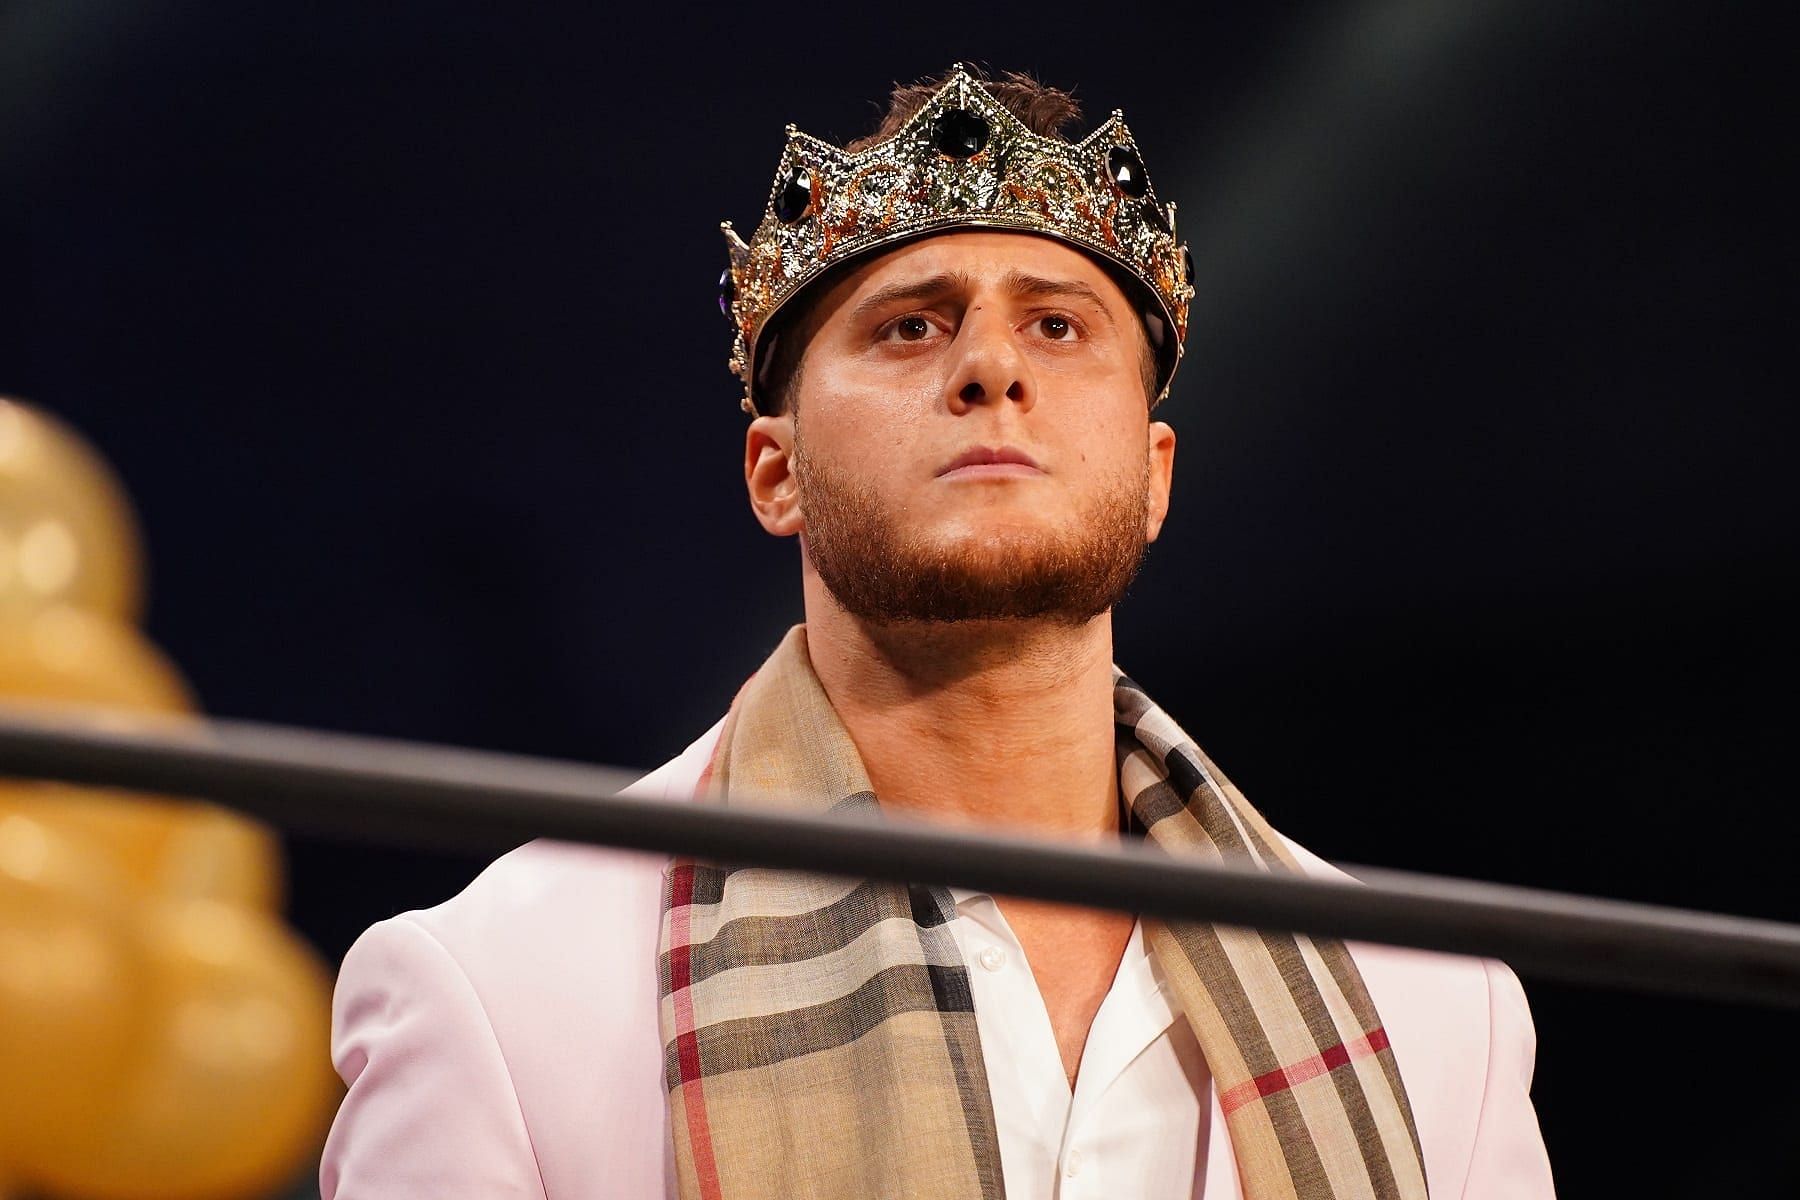 Jim Ross named MJF as a future AEW leader